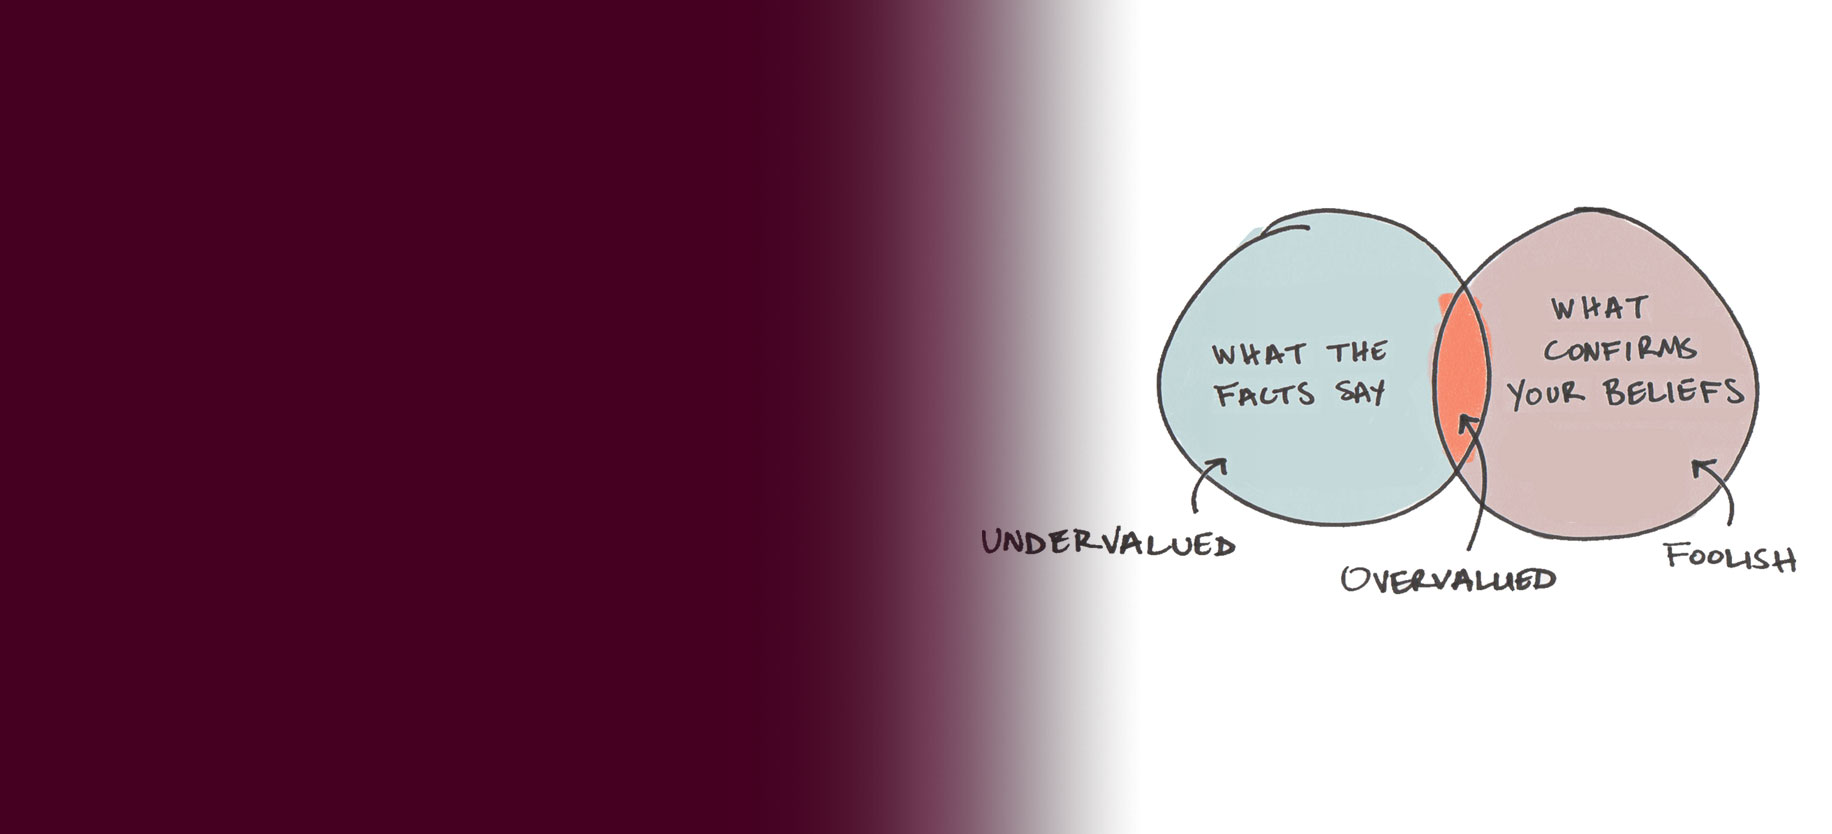 Illustration depicting a two-circle Venn diagram about investing: what the facts say and what confirms your beliefs